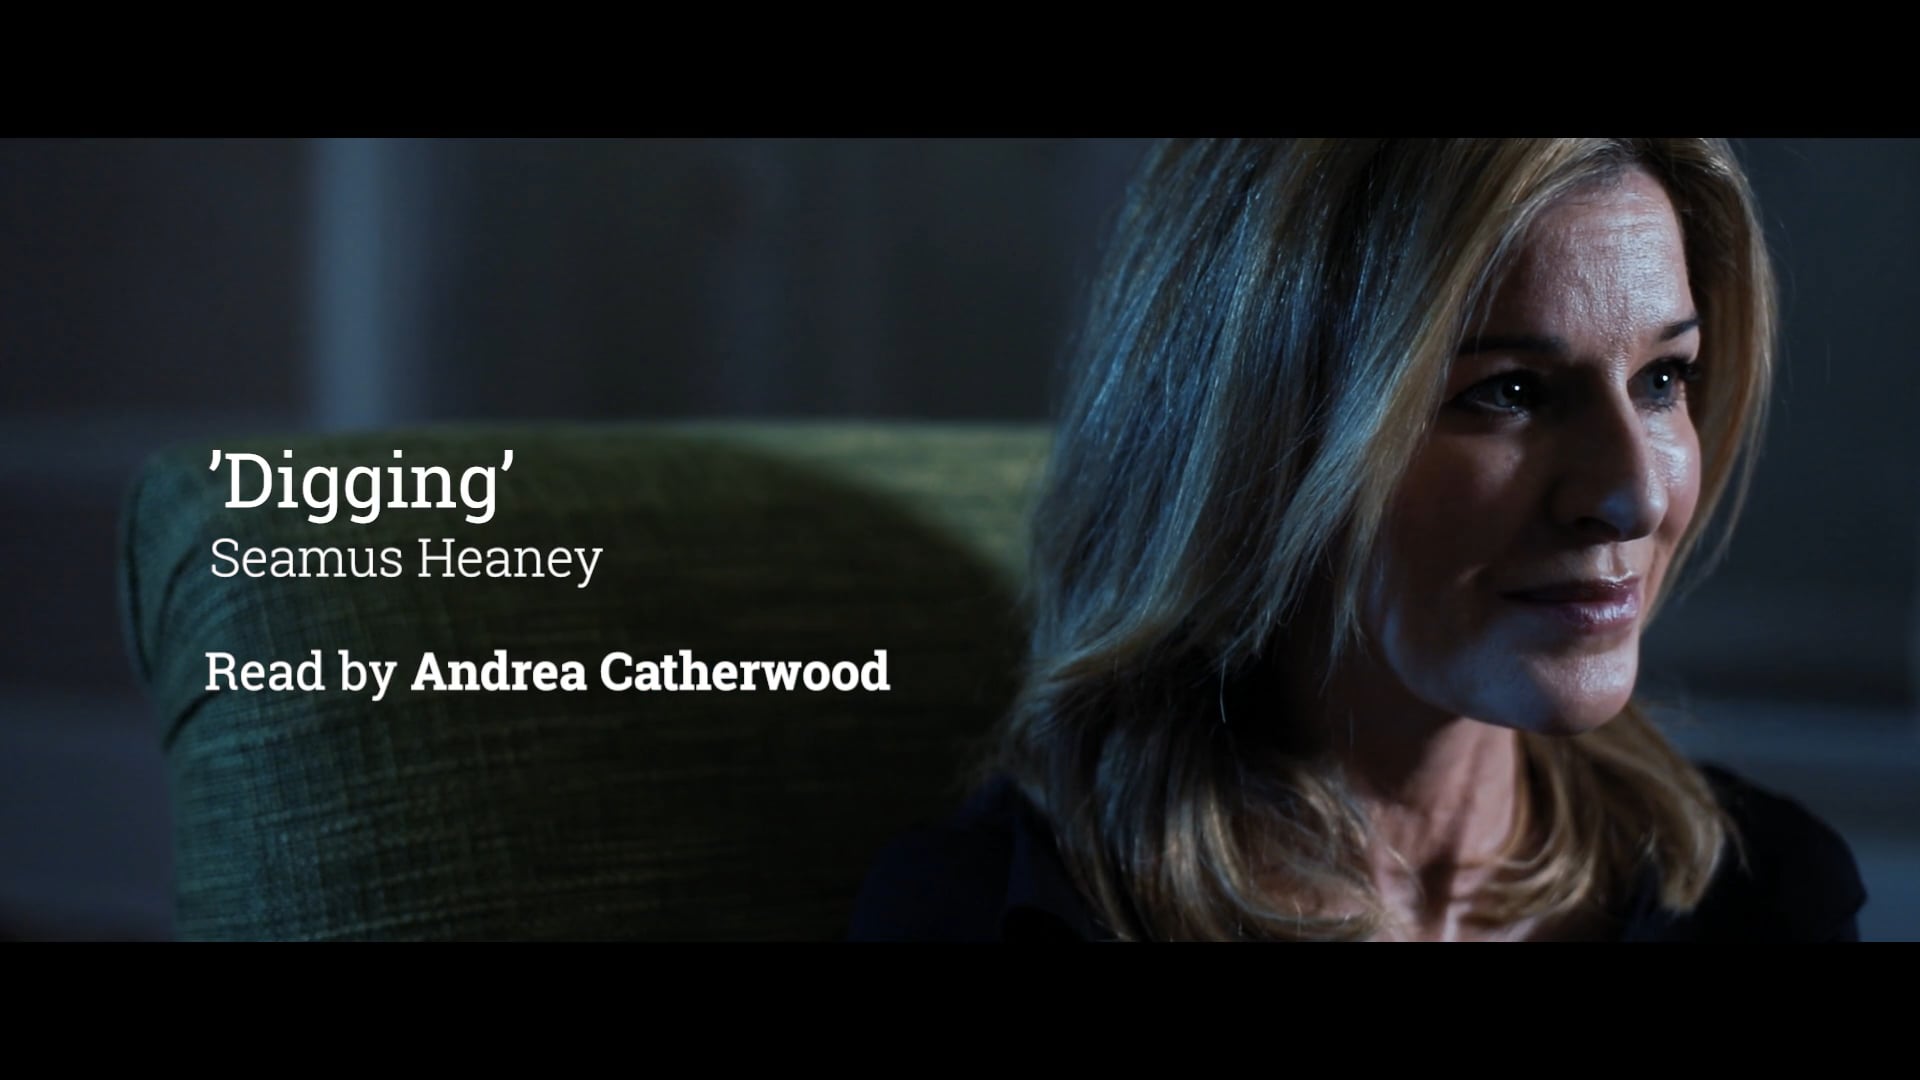 Andrea Catherwood 'Digging' by Seamus Heaney